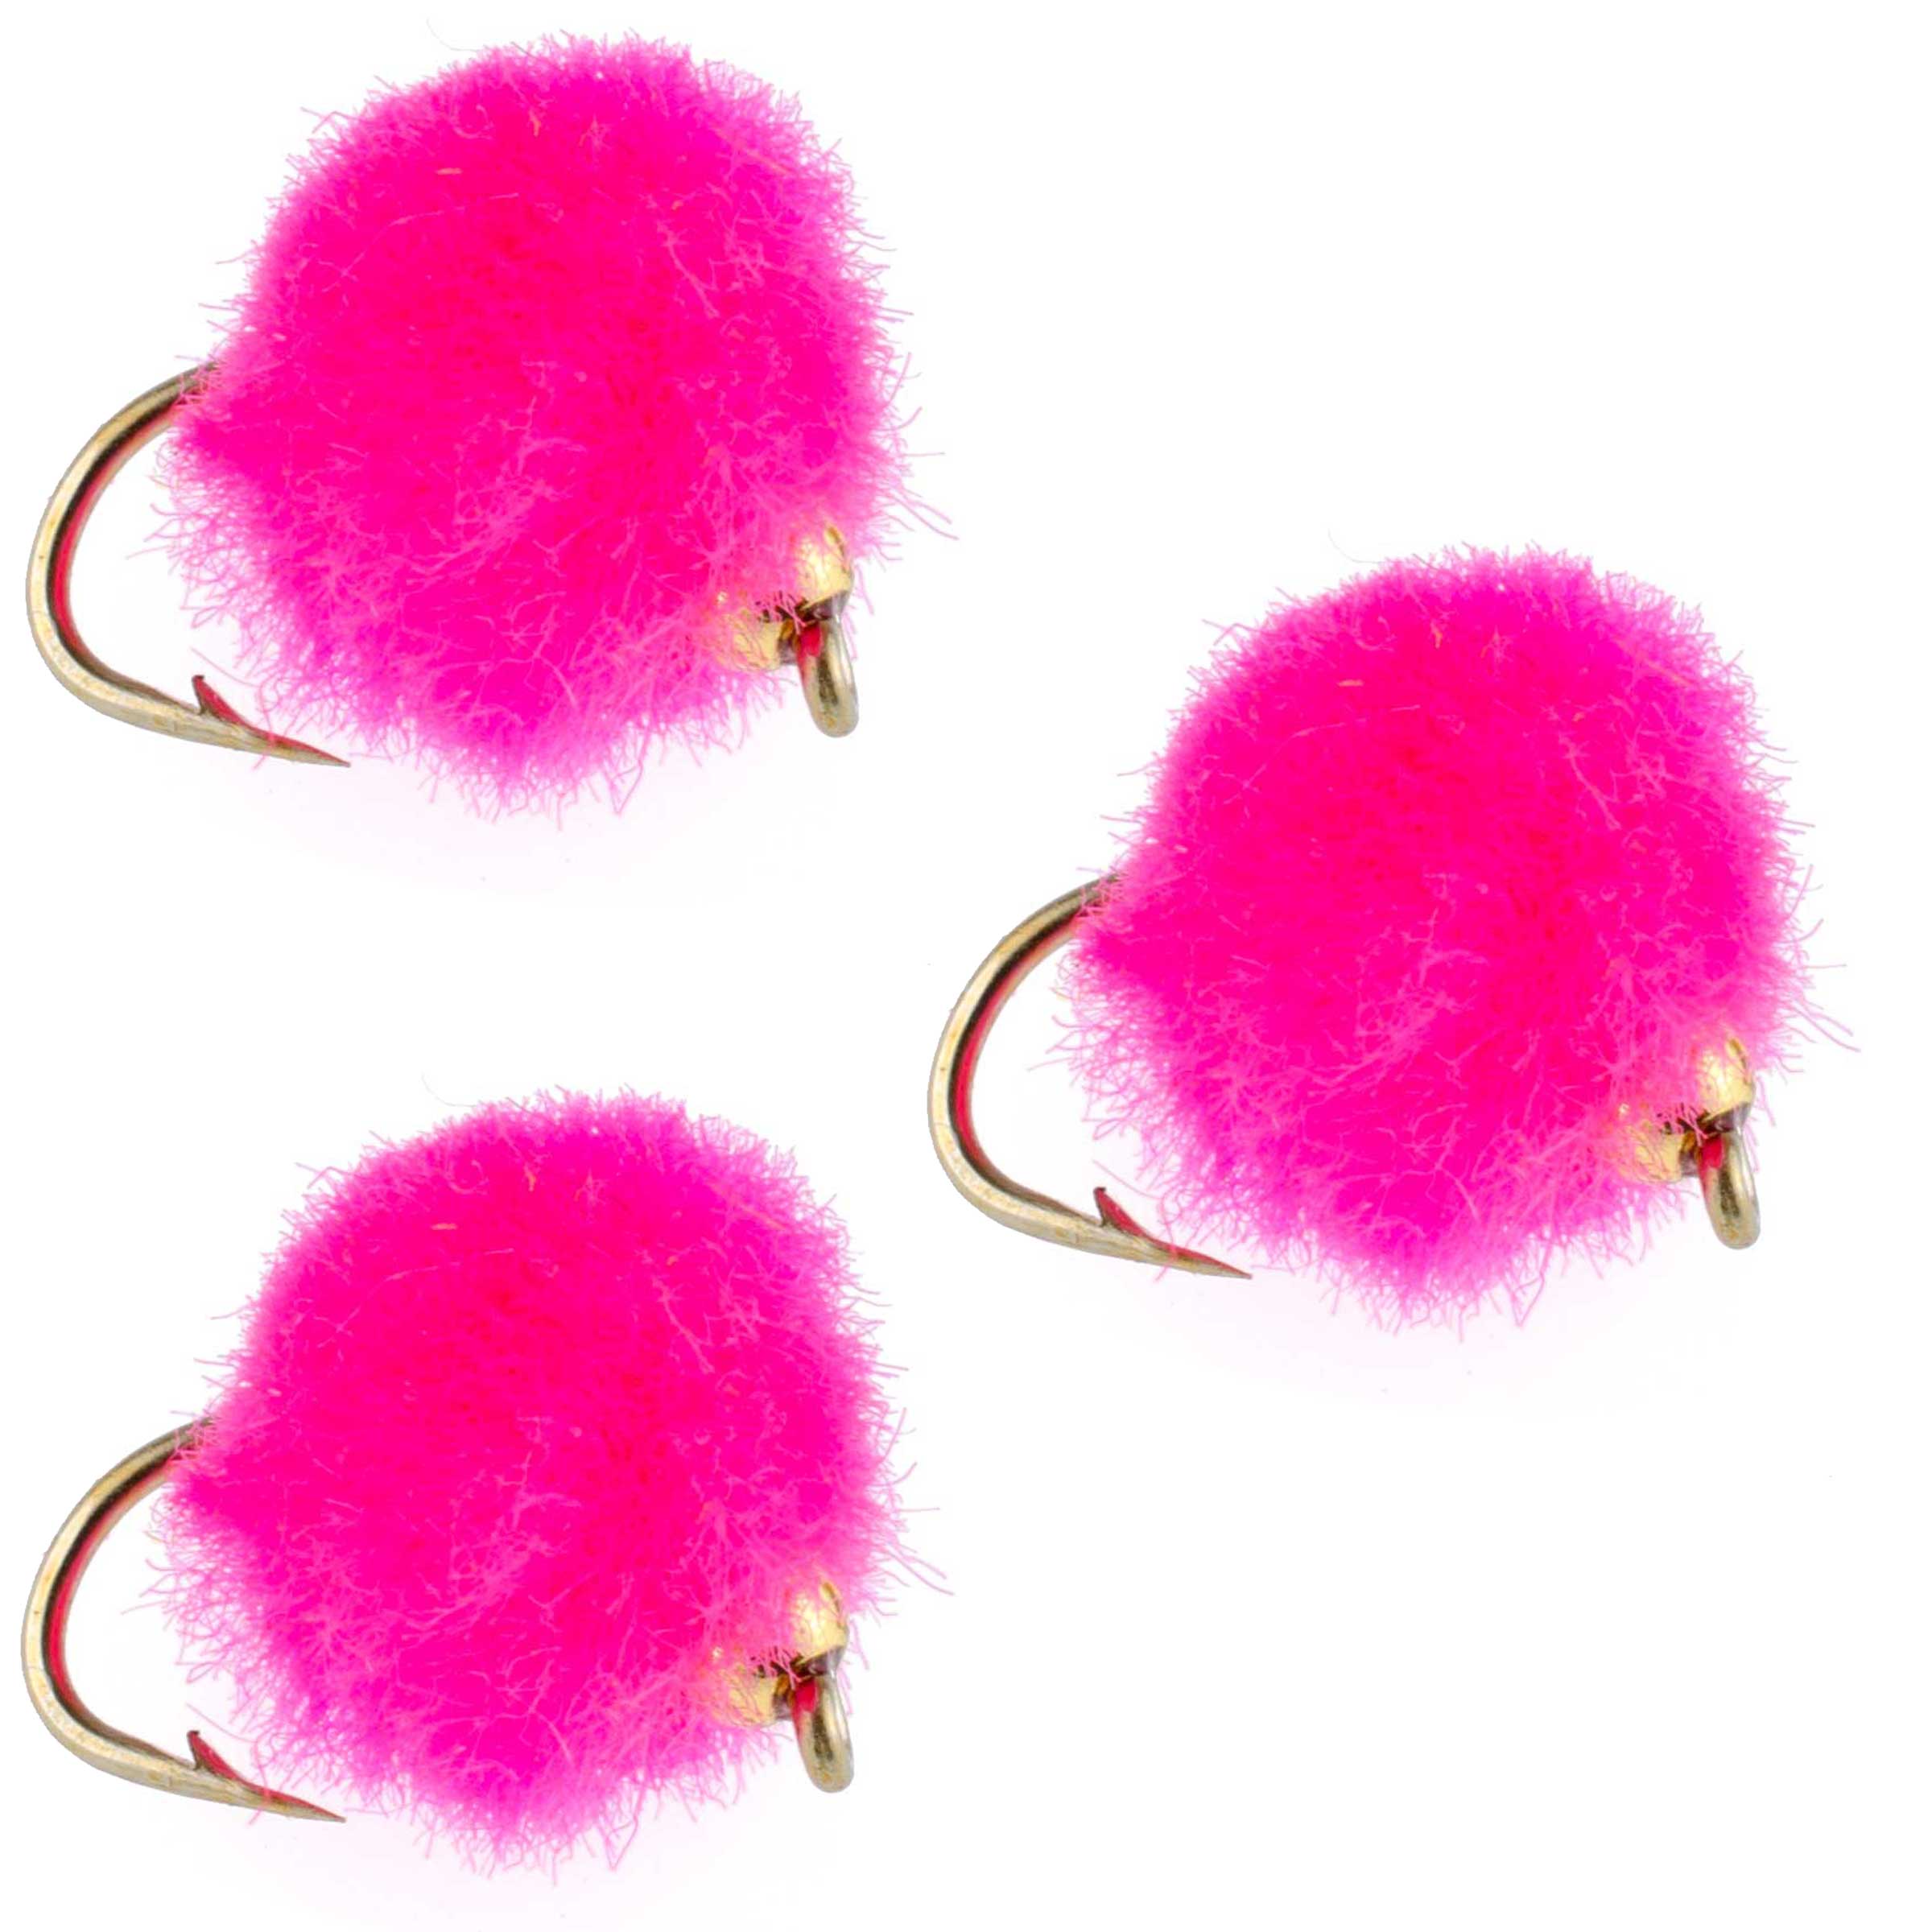 3 Pack Bead Head Hot Pink Egg Fly Fishing Flies -Hook Size 16